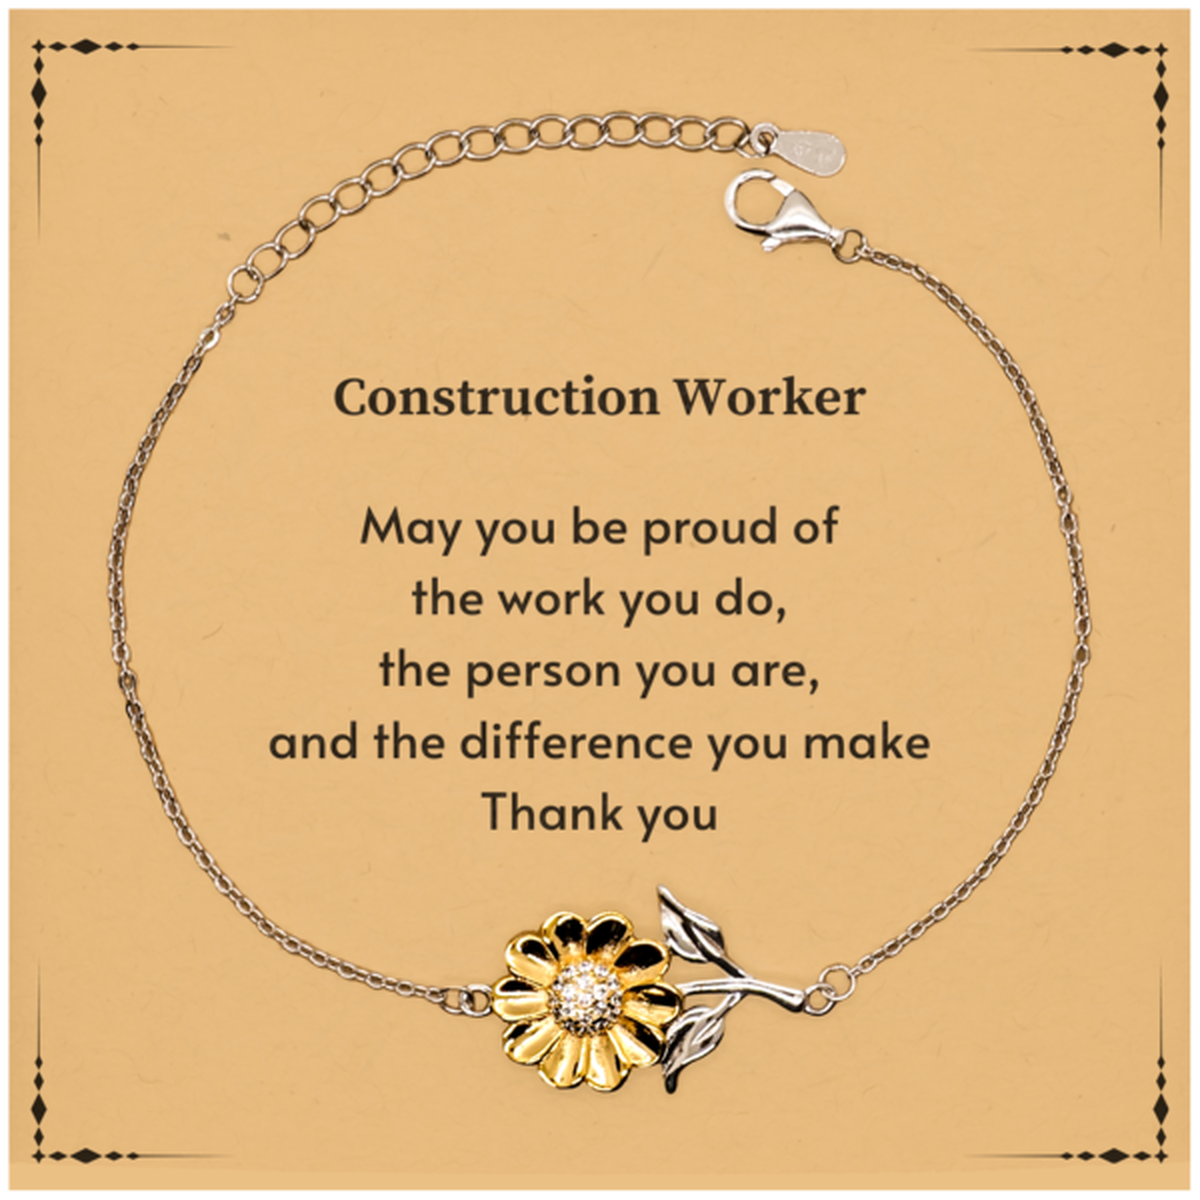 Heartwarming Sunflower Bracelet Retirement Coworkers Gifts for Construction Worker, Construction Worker May You be proud of the work you do, the person you are Gifts for Boss Men Women Friends